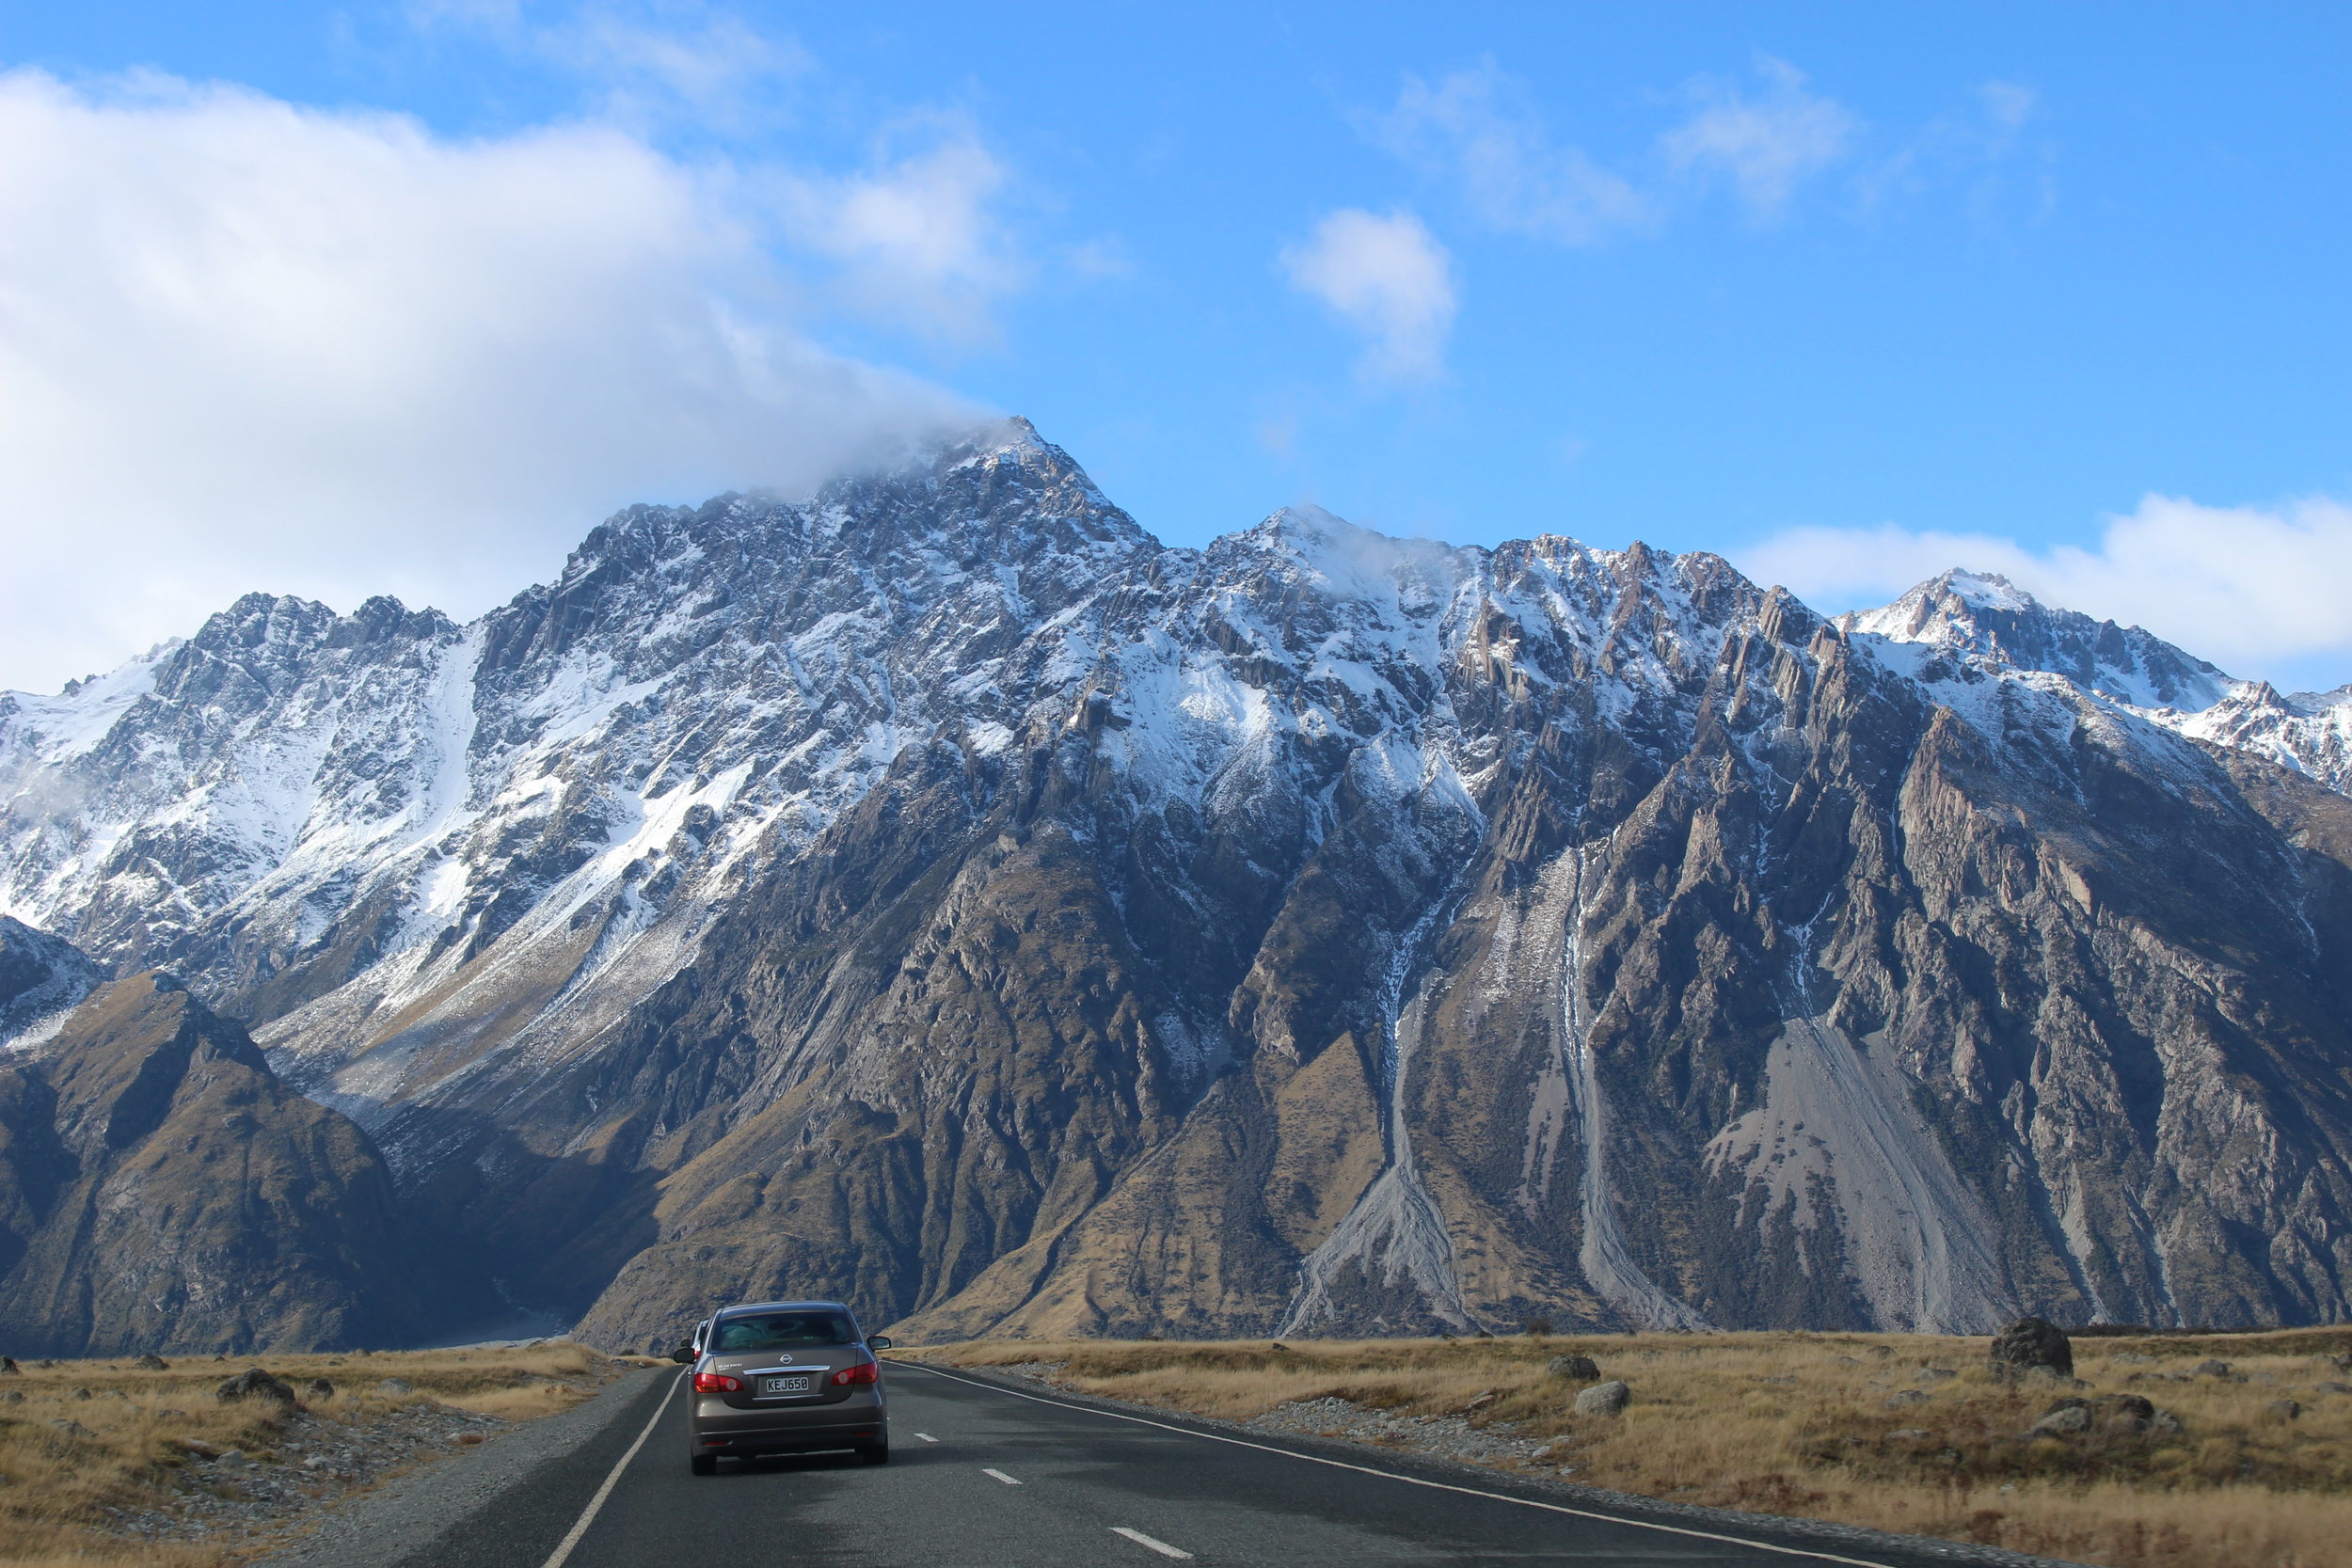  On the road to Christchurch 